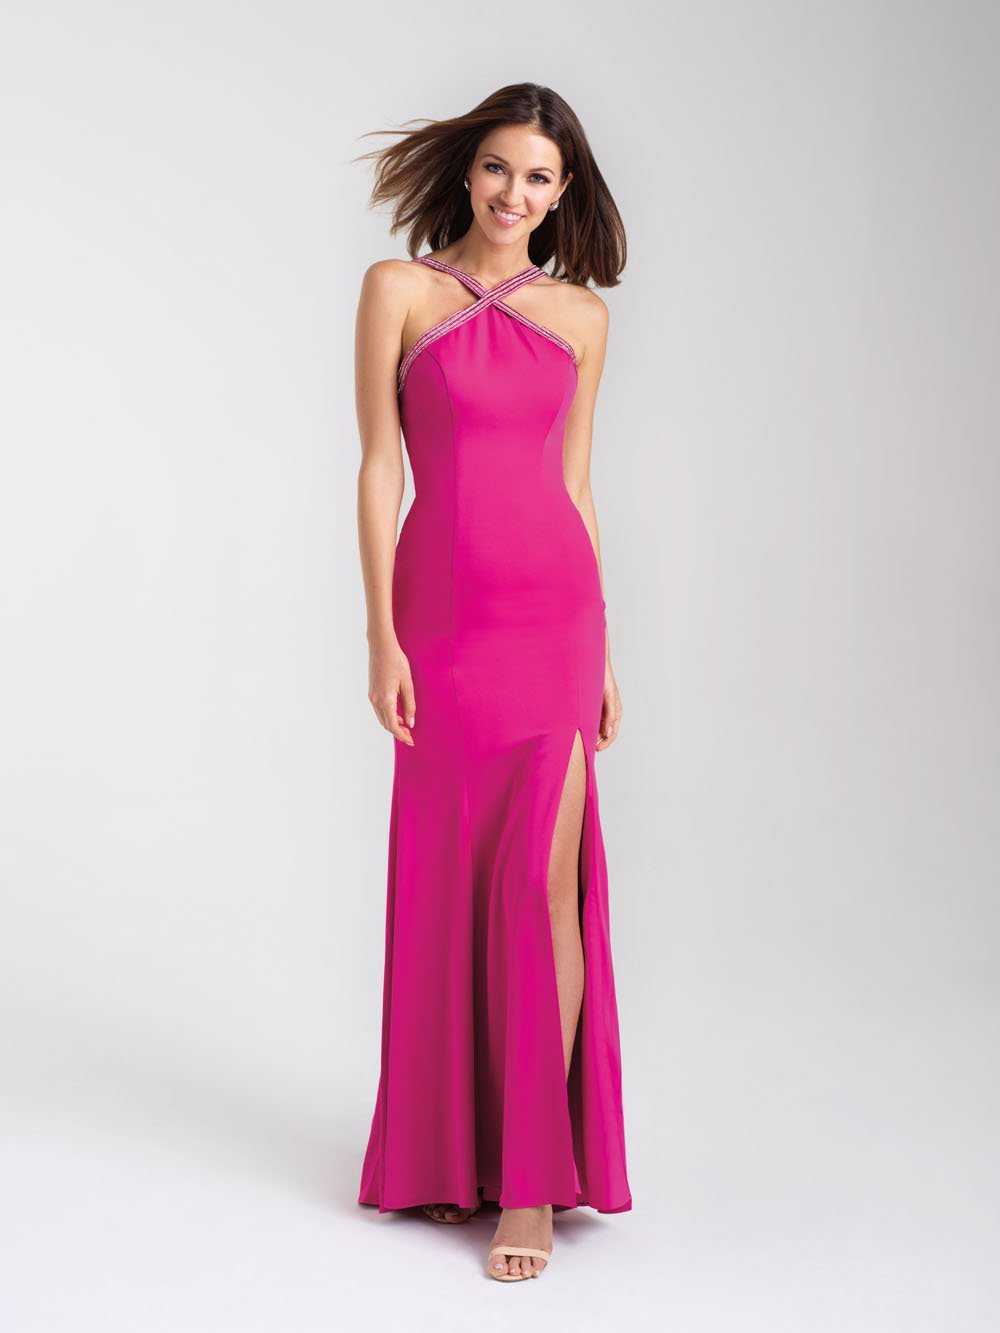 Madison James 20-324 dress images in these colors: Black, Royal, Fuchsia.